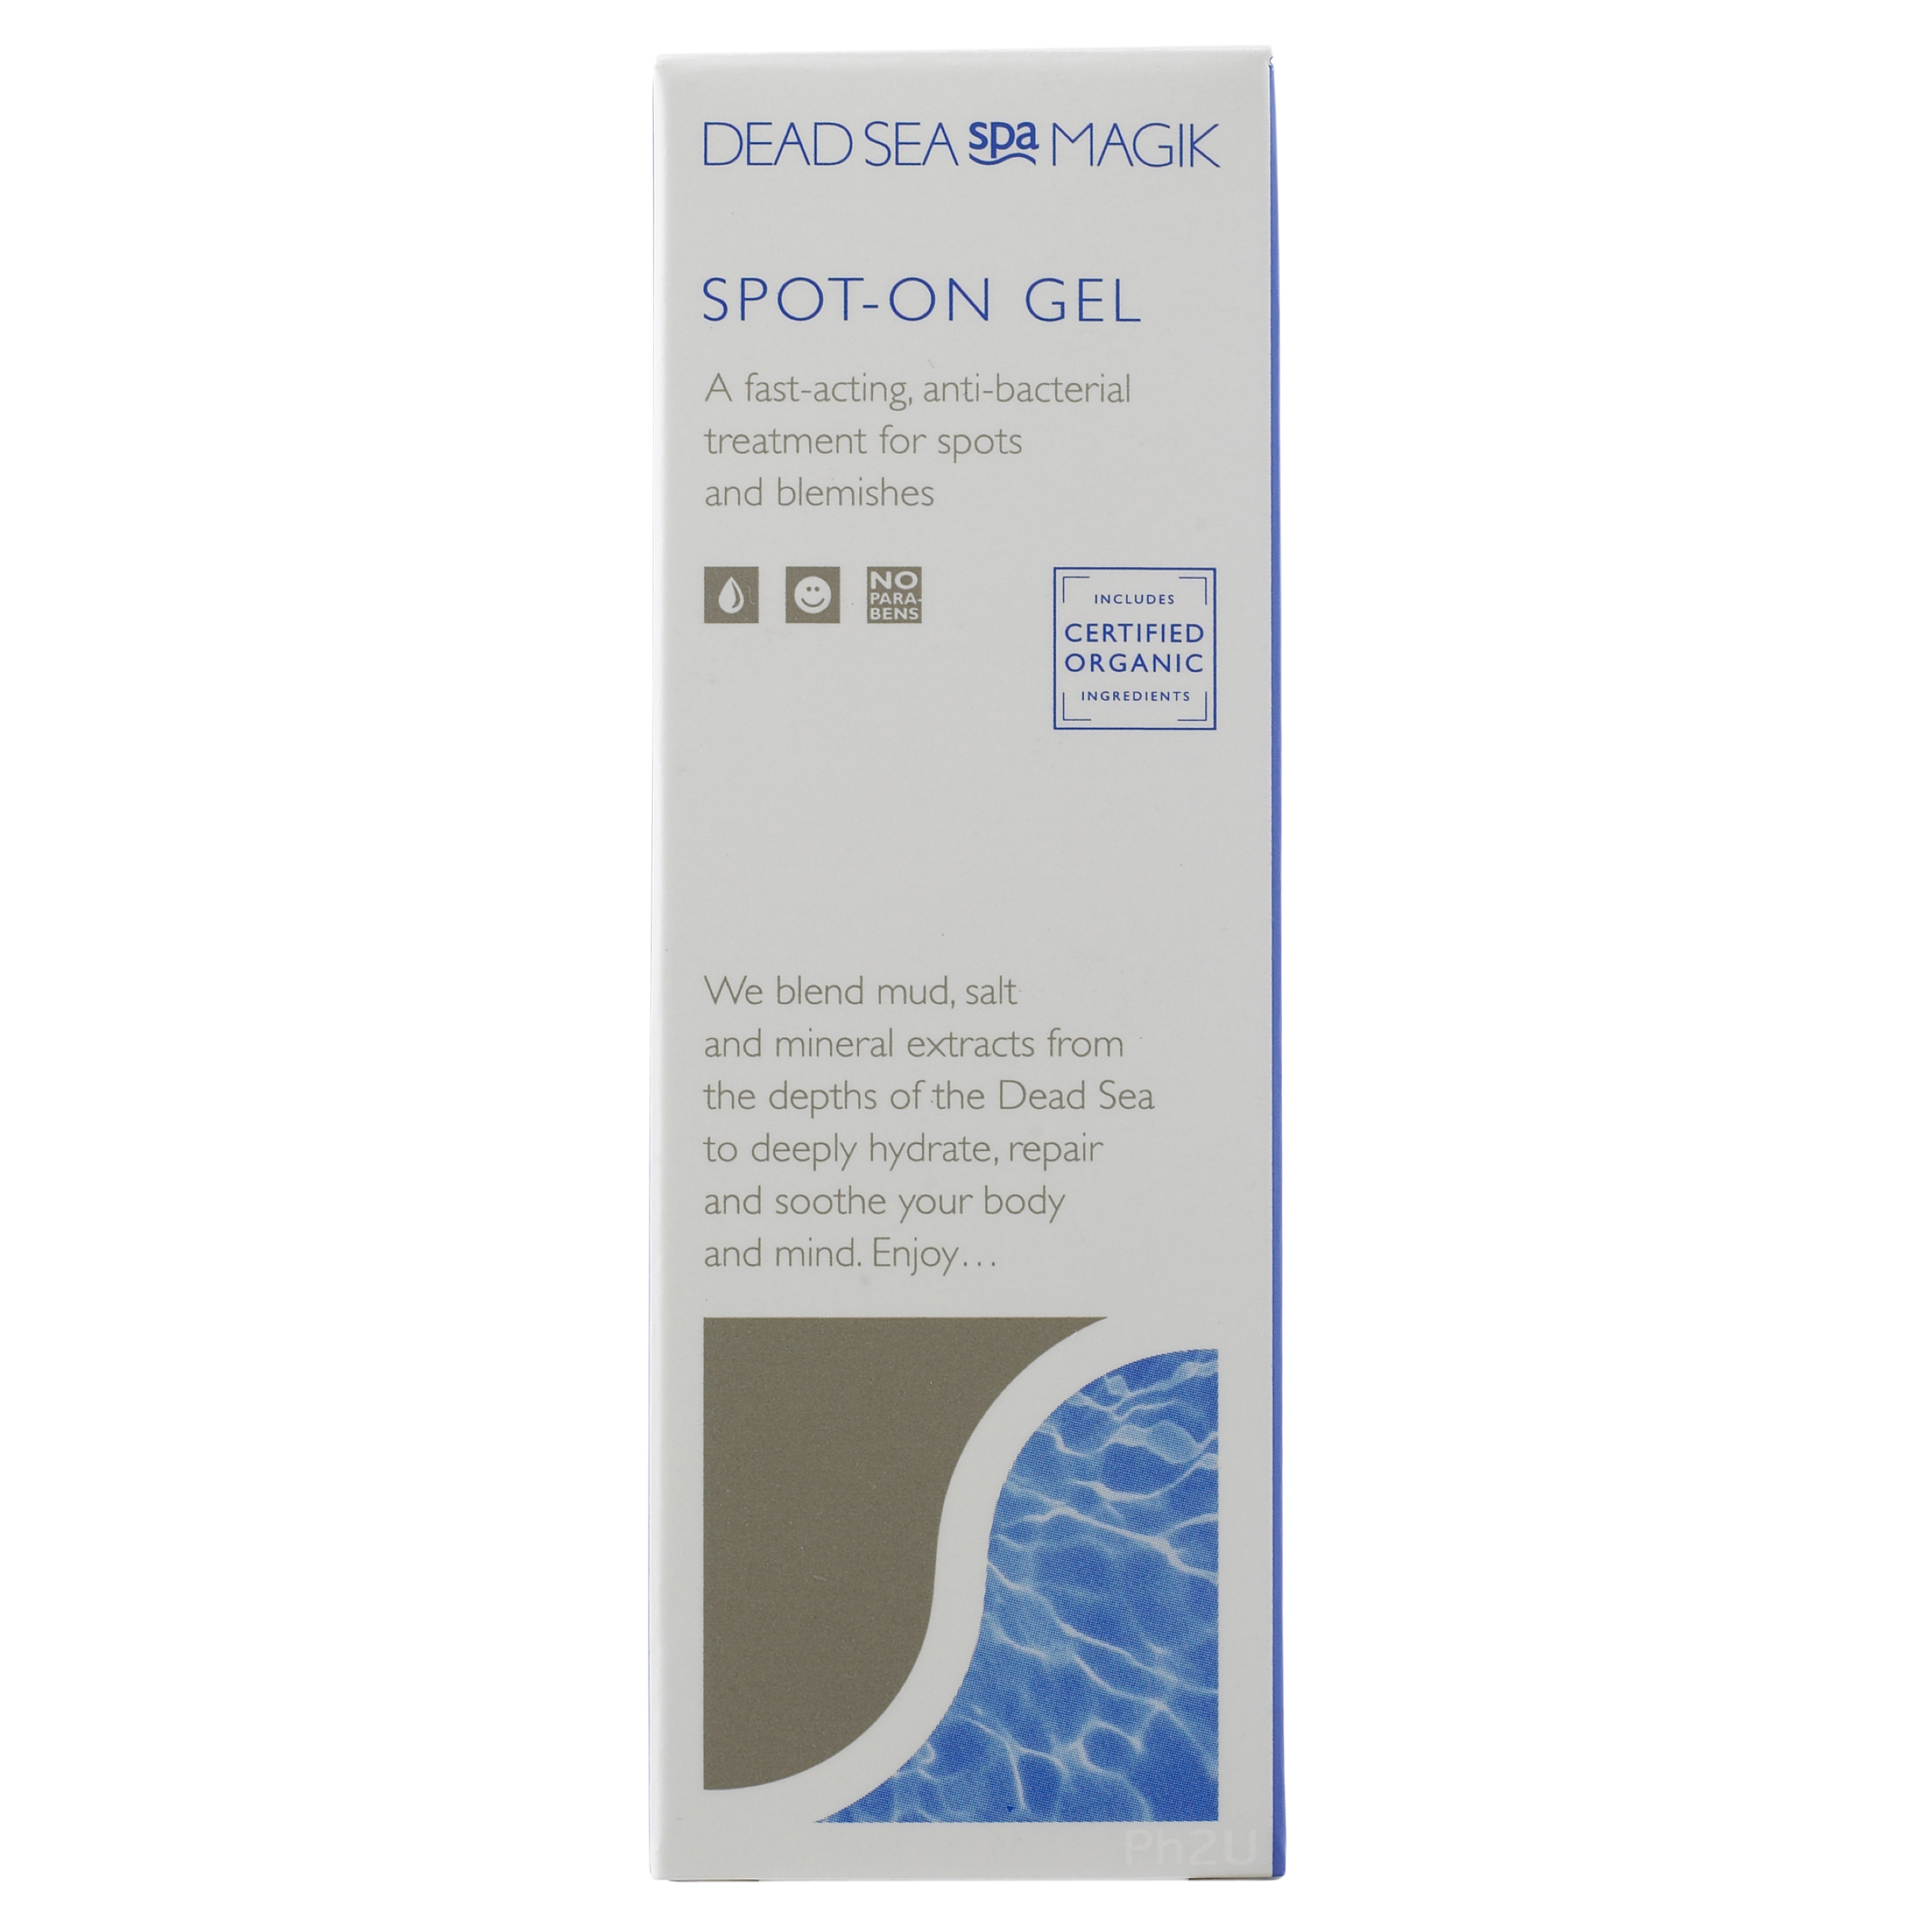 Spa Magik Dead Sea Spot On Gel contains dead sea mineral and plant extracts in a highly effective, q